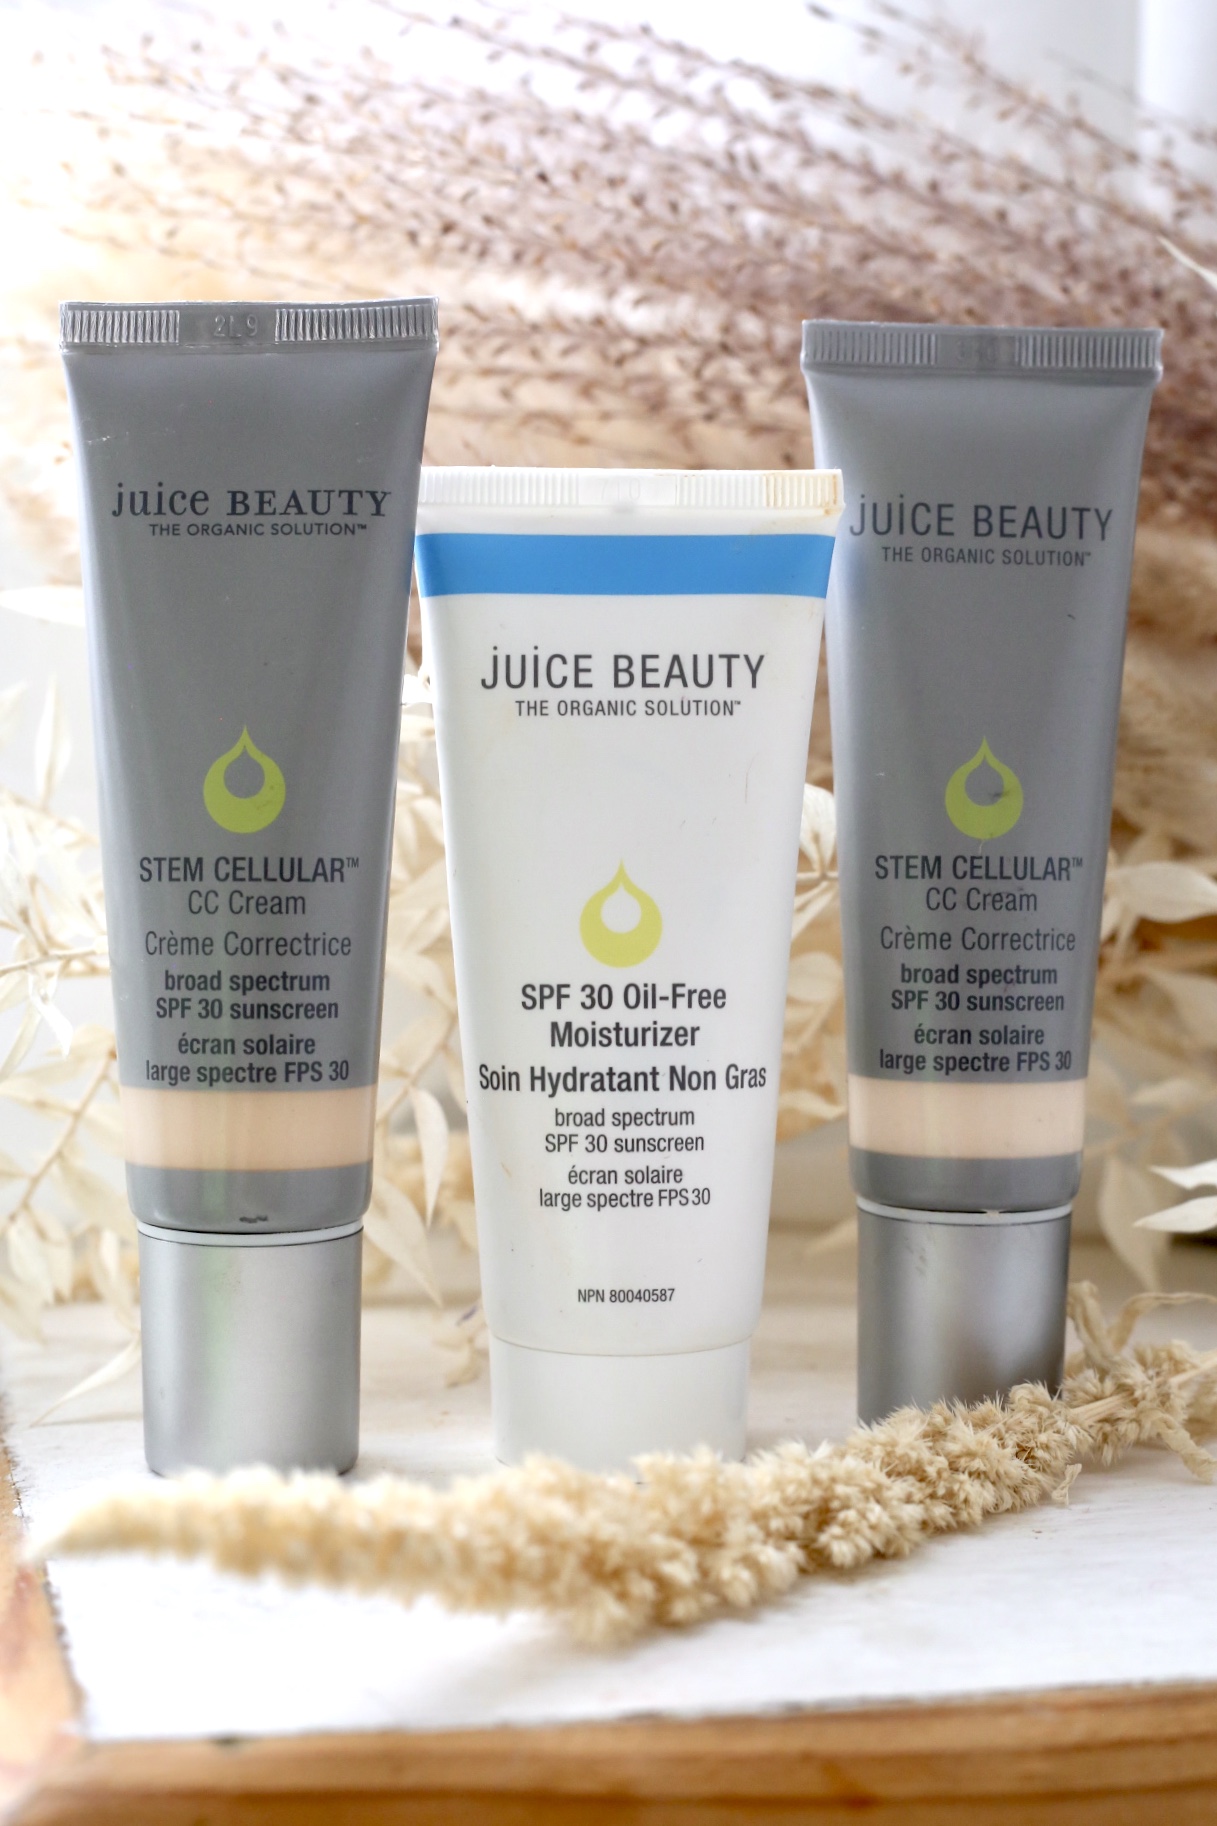 Juice beauty sunscreen review